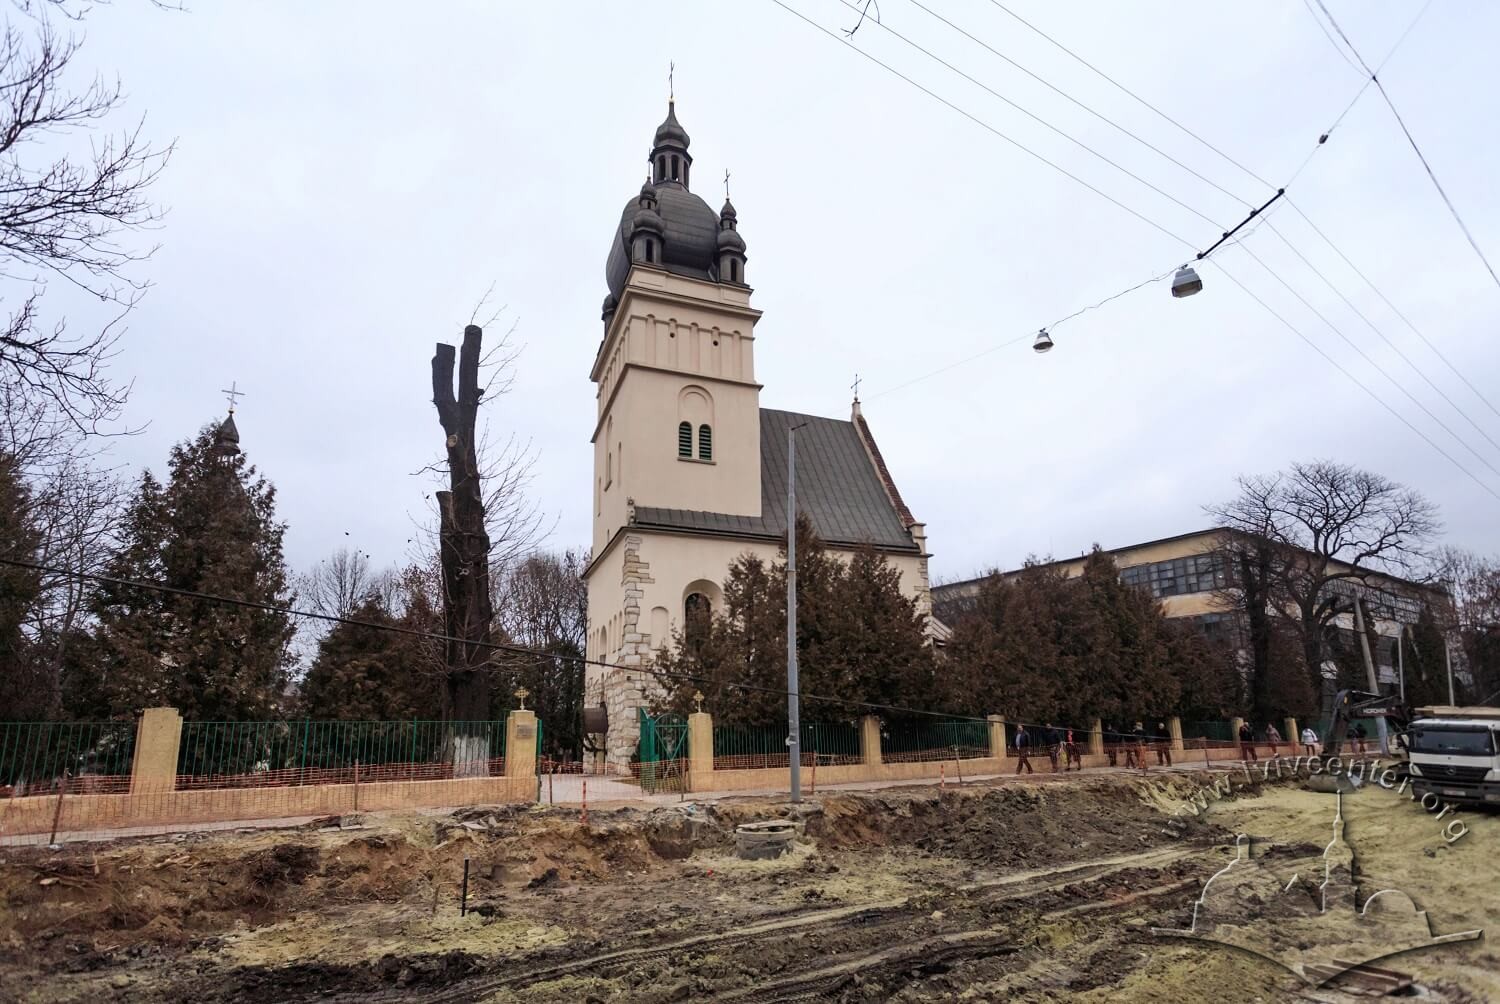 Vul. Khmelnytskoho, 77. View of the church from the southern side while the street is under reconstruction works/Photo courtesy of Nazarii Parkhomyk, 2015